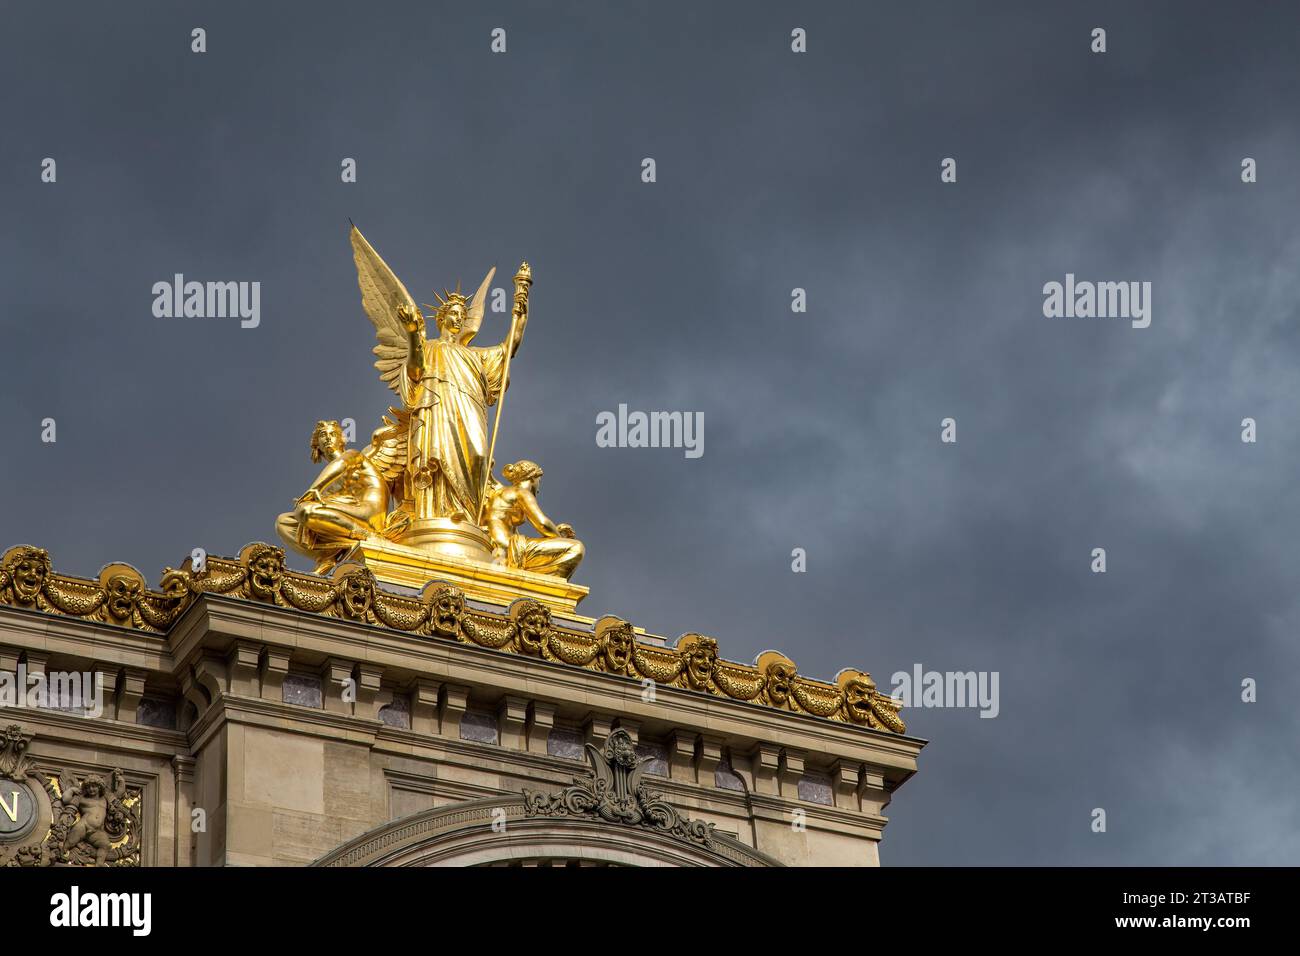 Paris, France - 2 March 2015: The golden statue of Liberty on the roof of the Opera Garnier, or Paris Opera House. Sculpted by Charles Gumery in 1869. Stock Photo